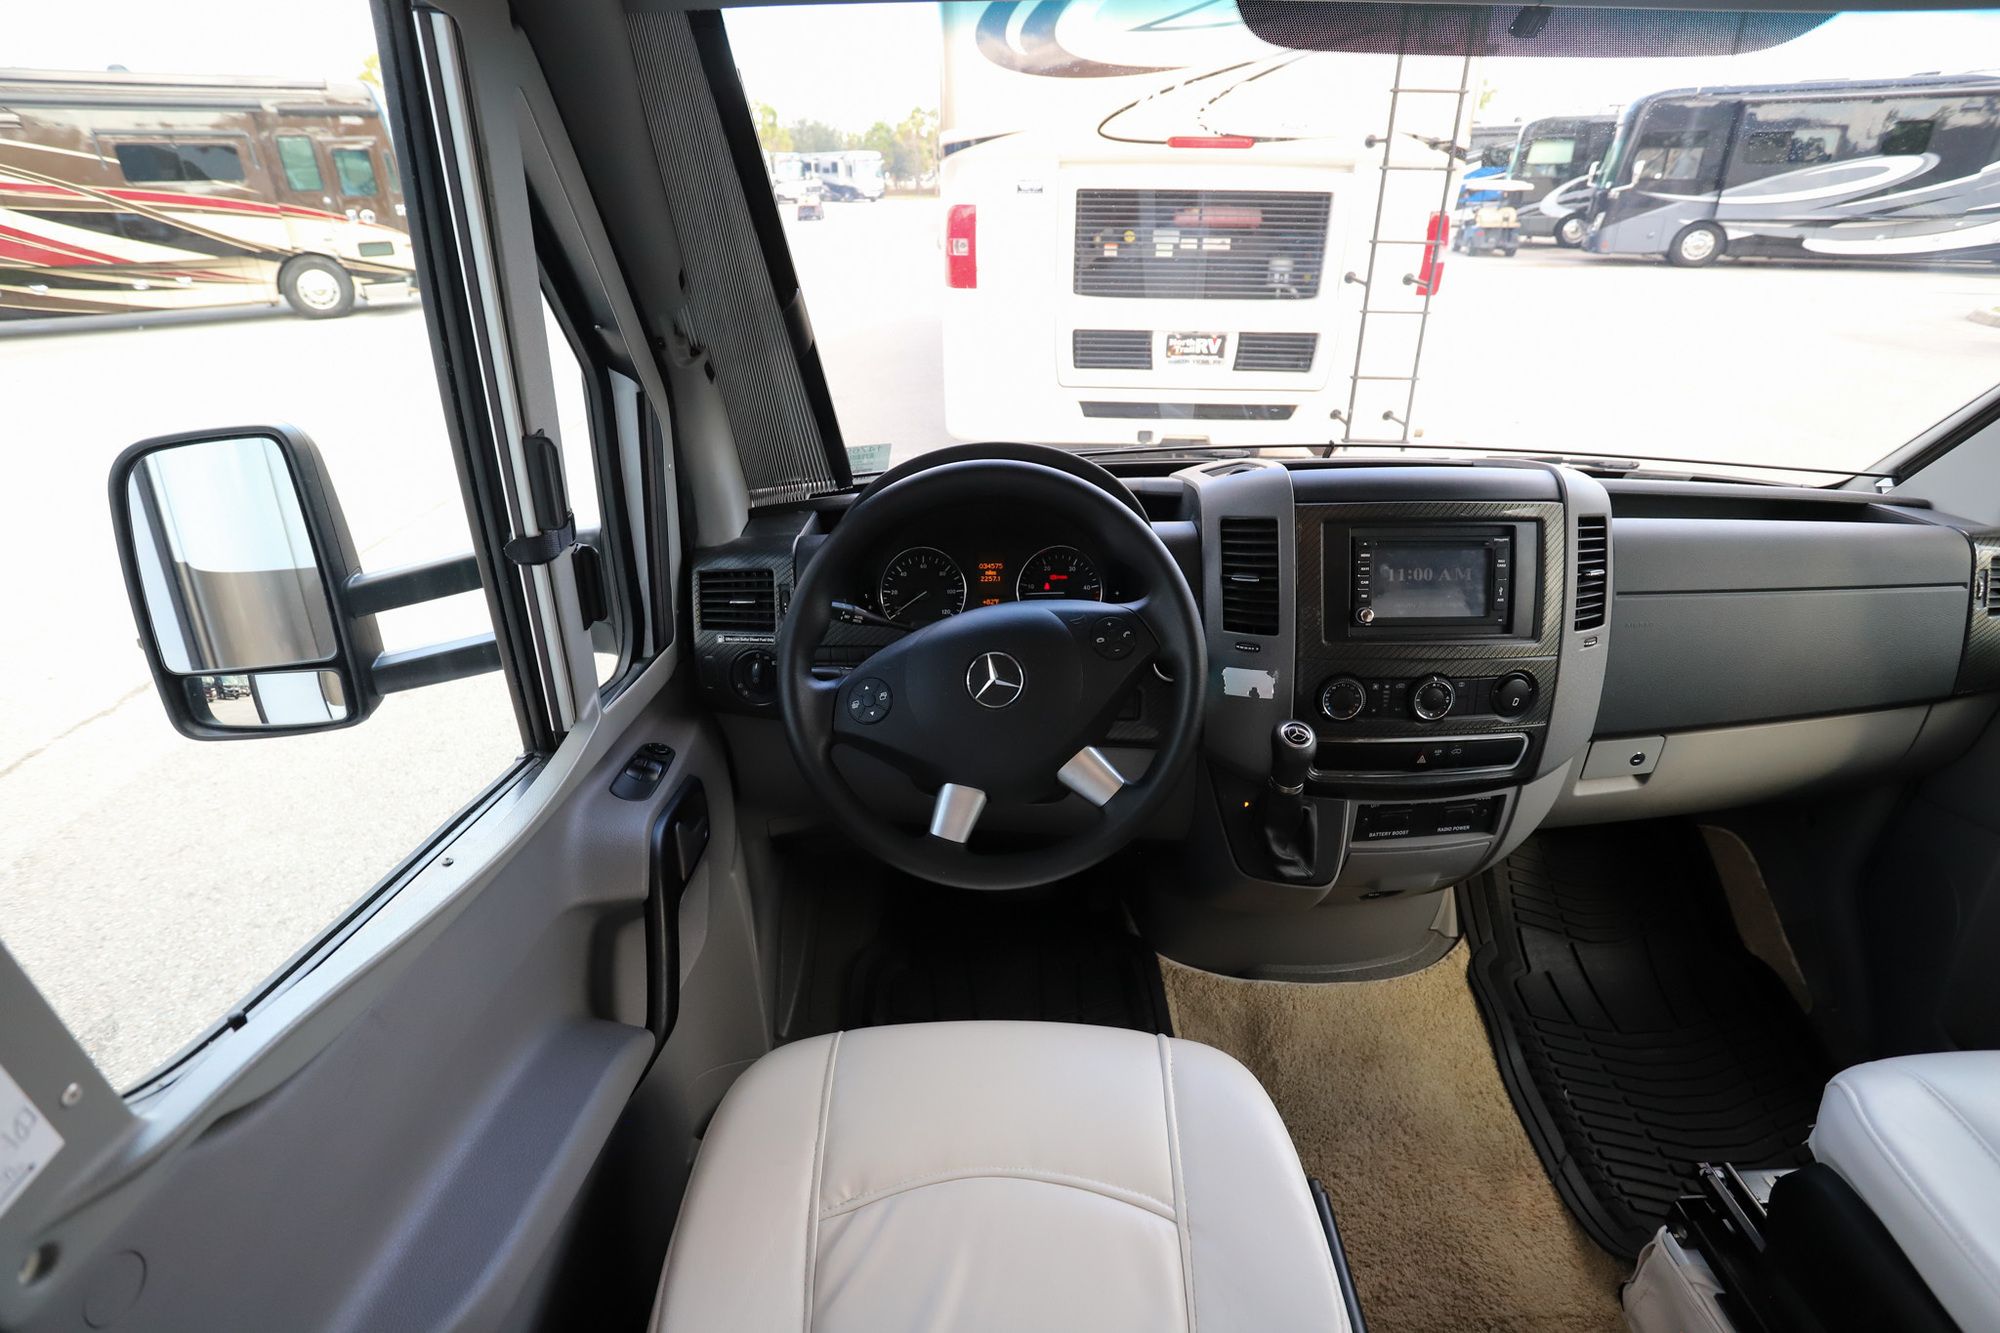 Used 2017 Winnebago View 24V Class C  For Sale